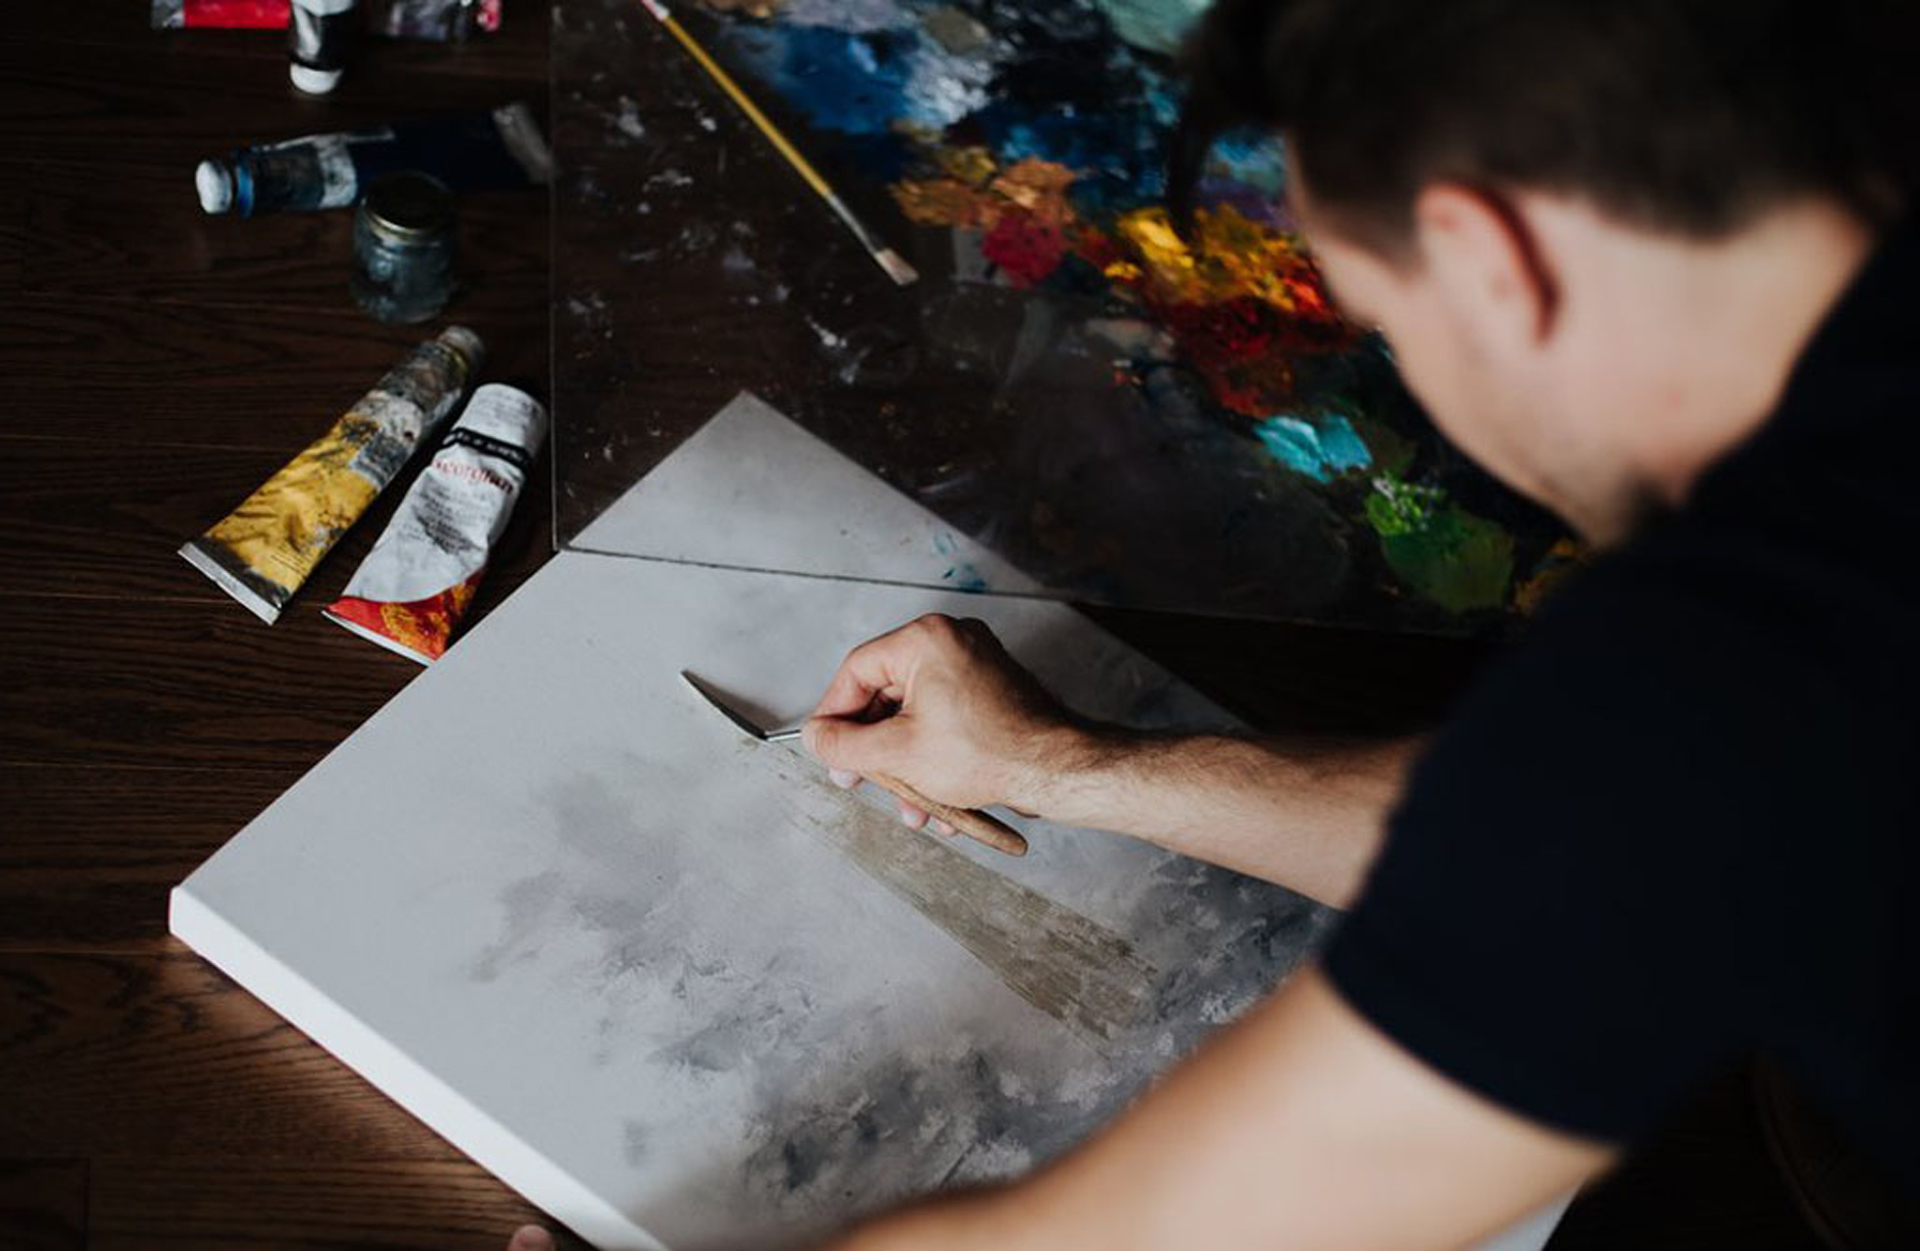 Hobby turned profession: Exploring life as an Artist in Toronto with Michael Wills